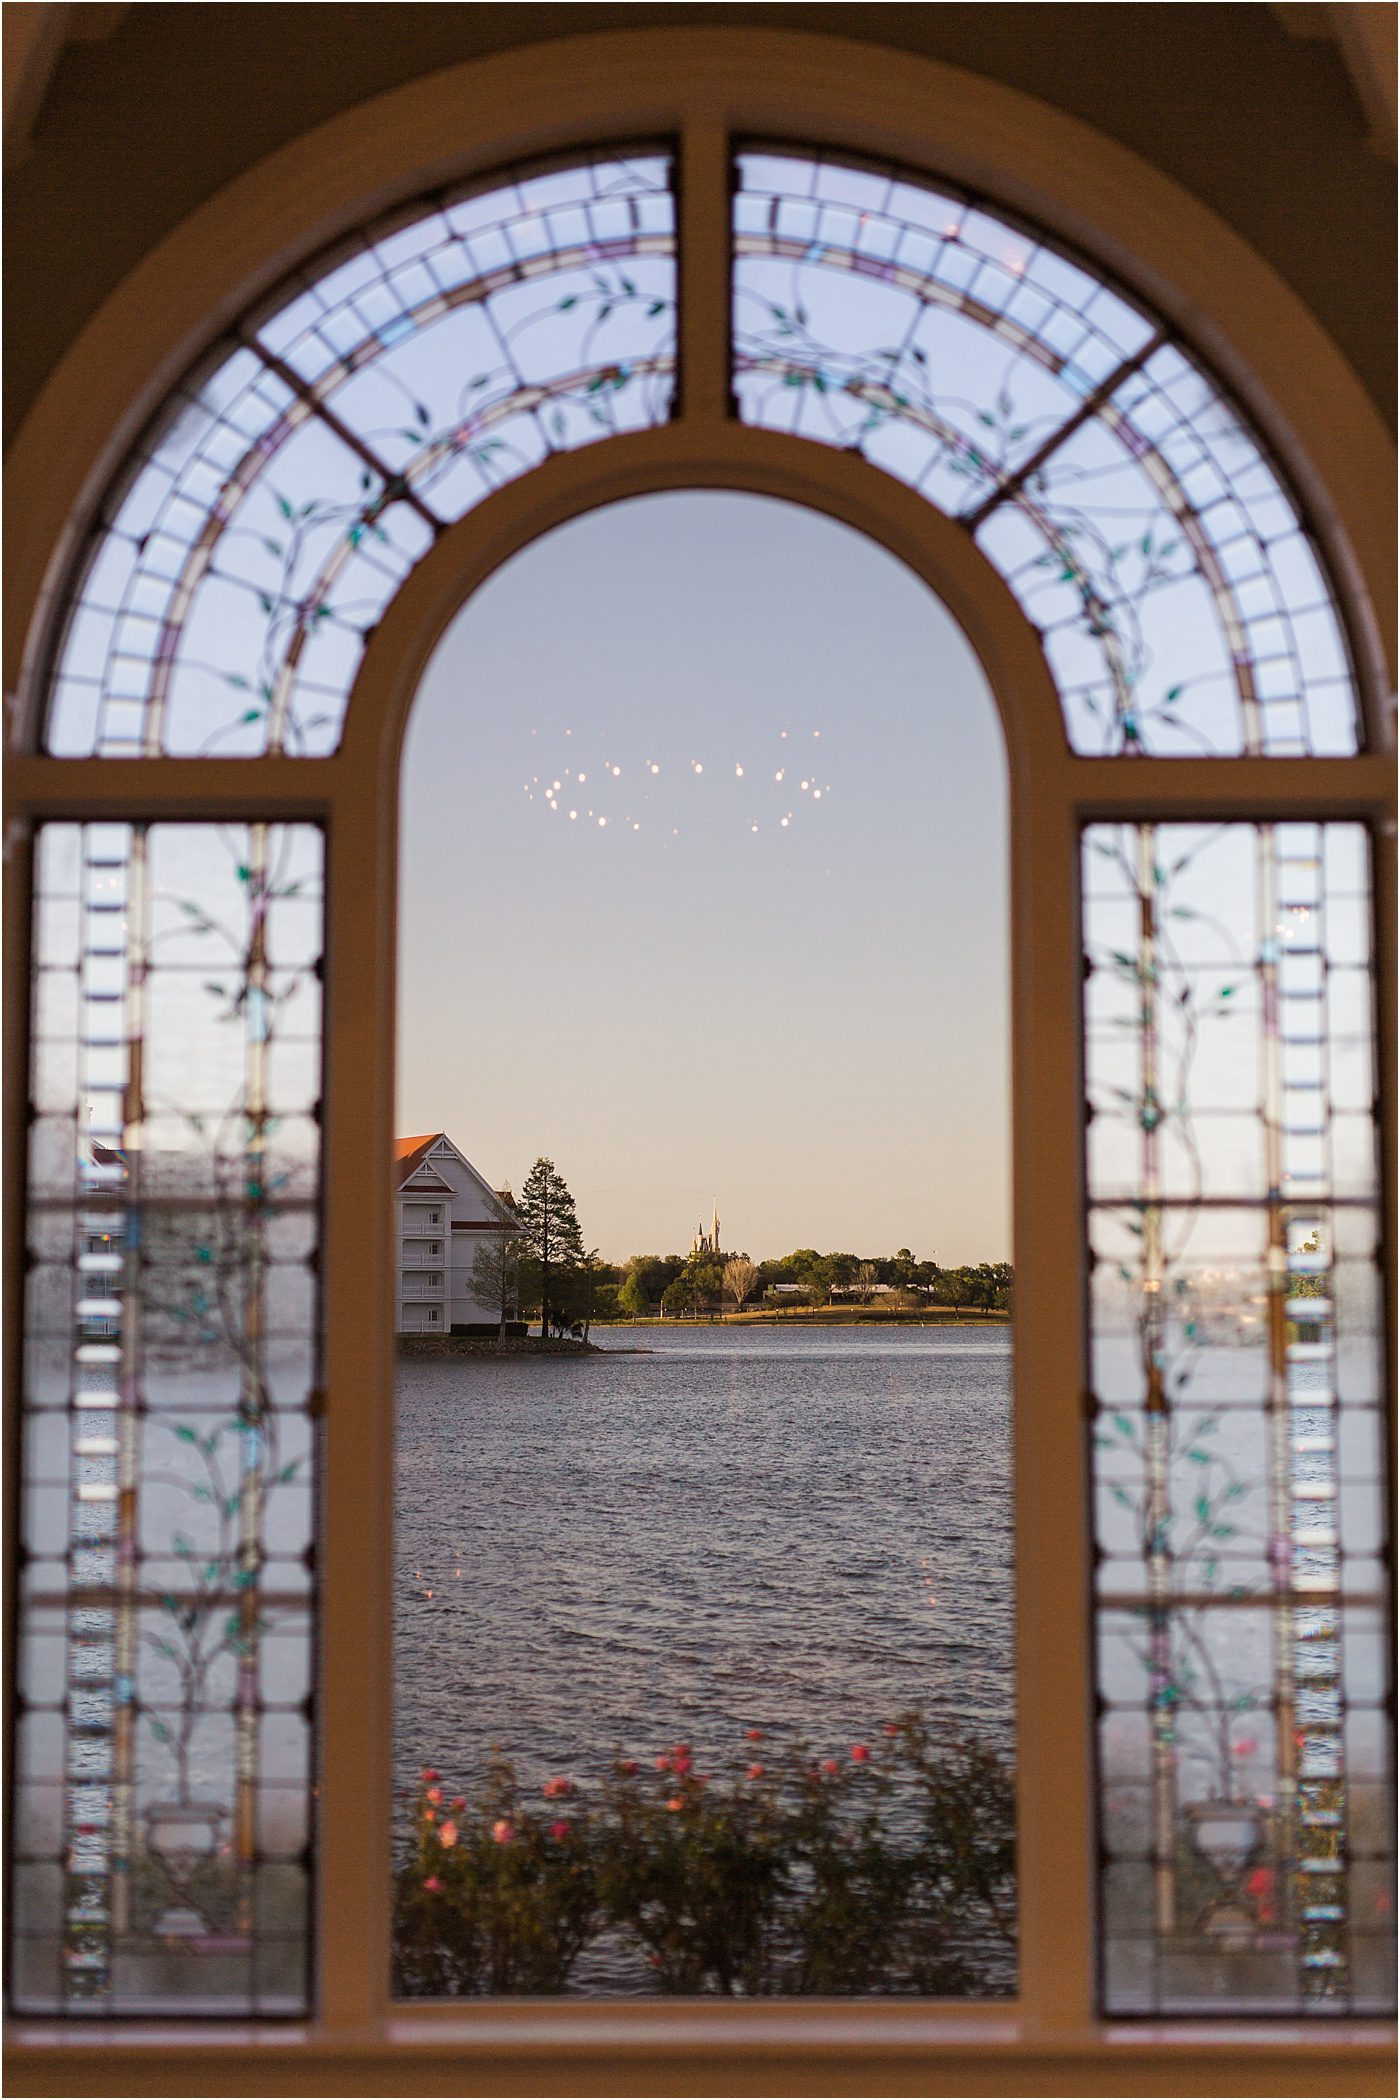 Disney World Wedding at Grand Floridian with Beauty and the Beast Theme | Charleston Wedding Photographer | Catherine Ann Photography